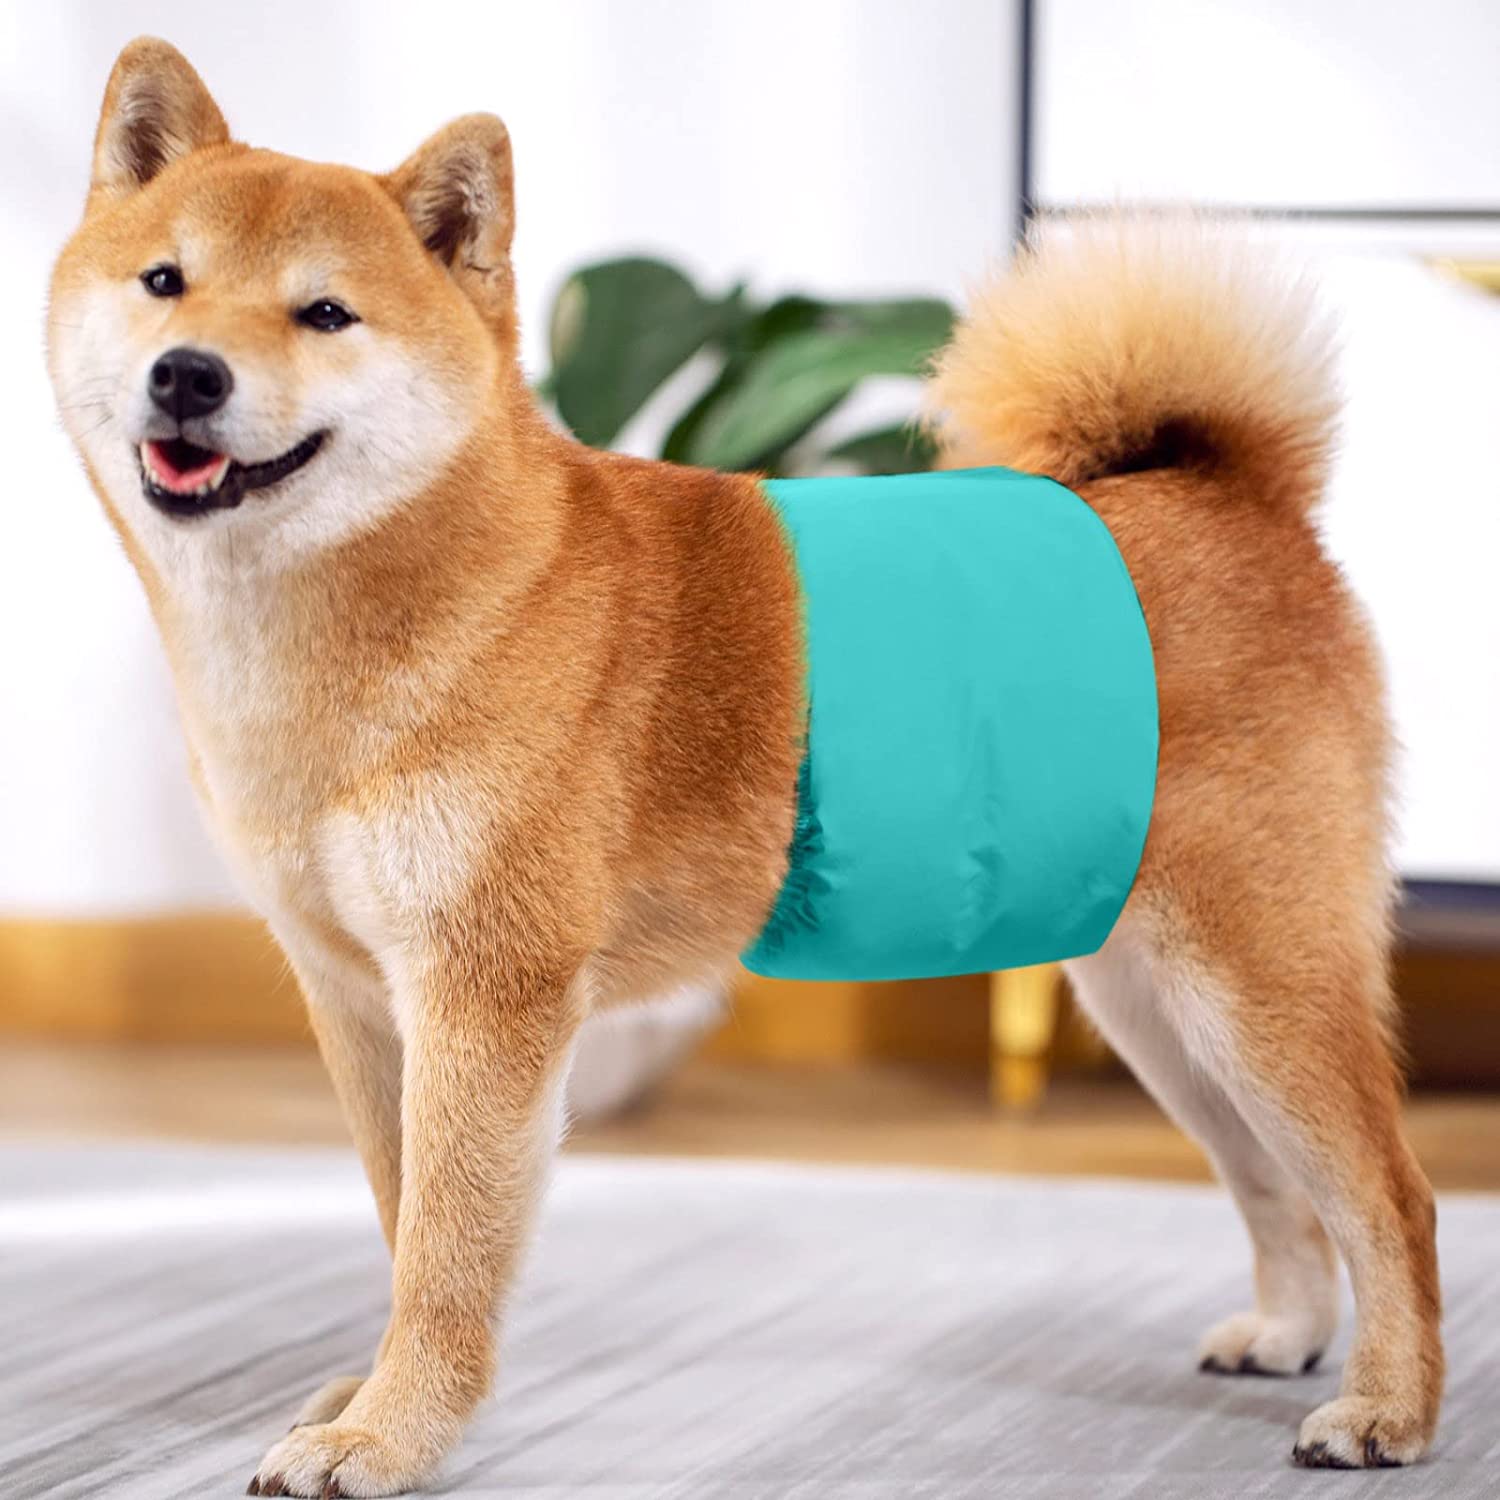 KUTKUT Dog Diapers Male, Reusable Belly Bands for Male Dogs Wraps Highly Absorbent Diapers for Dog, Waterproof Super Absorbent Puppy Wraps Cover Sanitary Nappies Pants (Green) - kutkutstyle